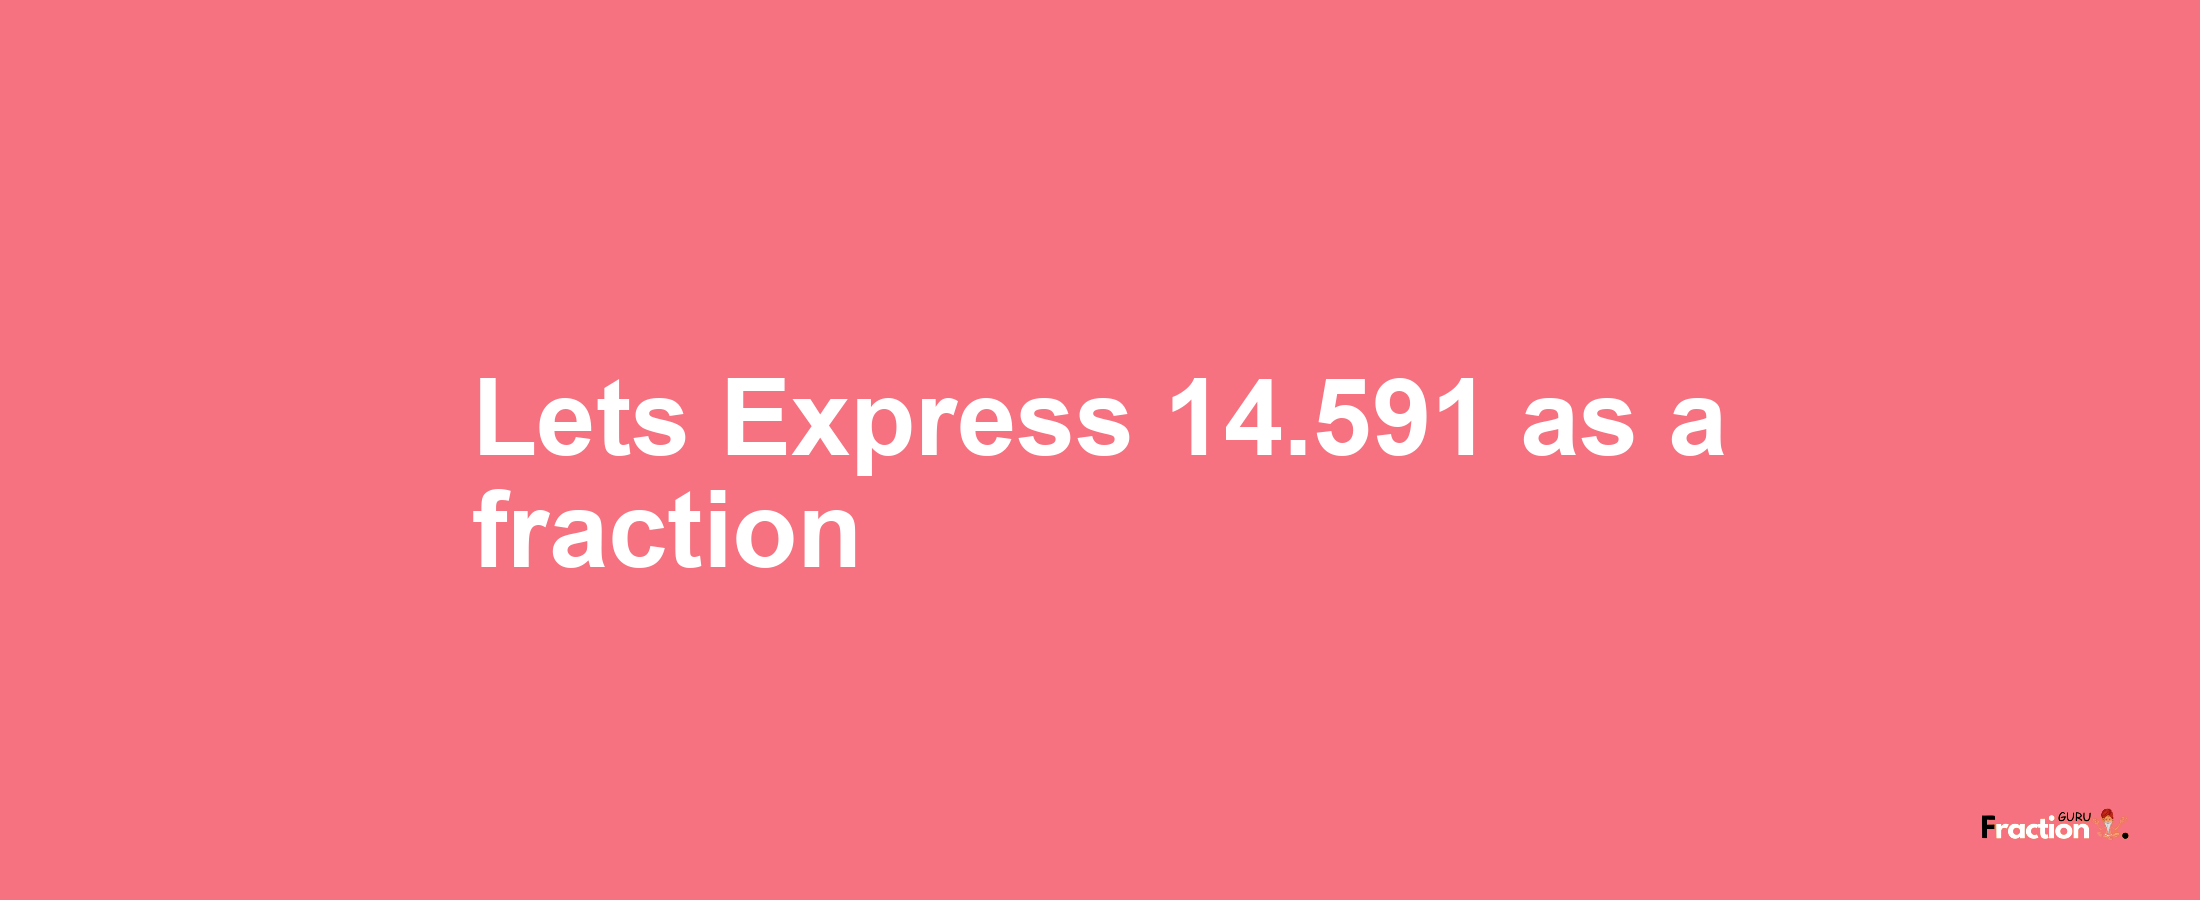 Lets Express 14.591 as afraction